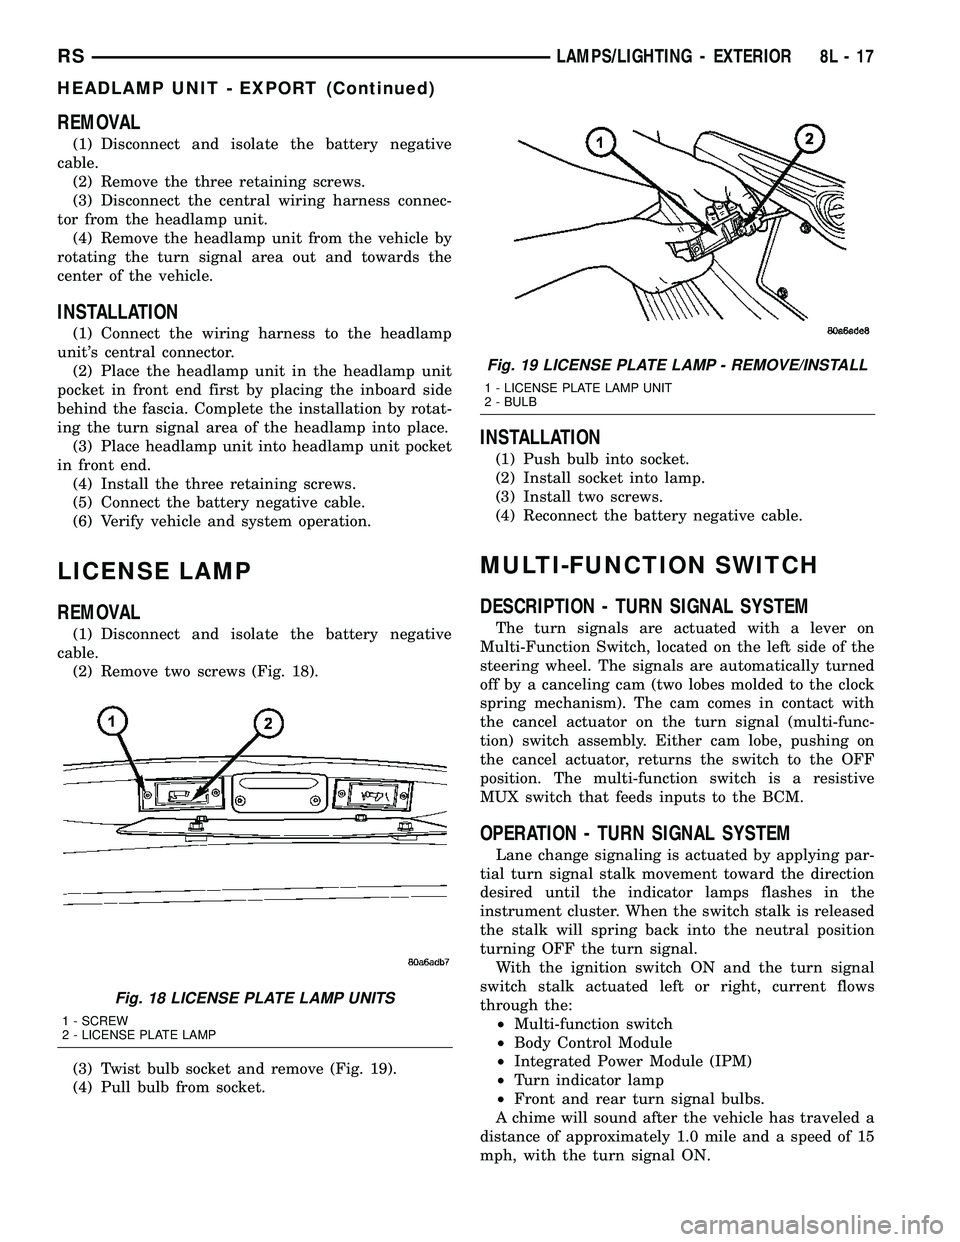 CHRYSLER VOYAGER 2005  Service Manual REMOVAL
(1) Disconnect and isolate the battery negative
cable.
(2) Remove the three retaining screws.
(3) Disconnect the central wiring harness connec-
tor from the headlamp unit.
(4) Remove the headl